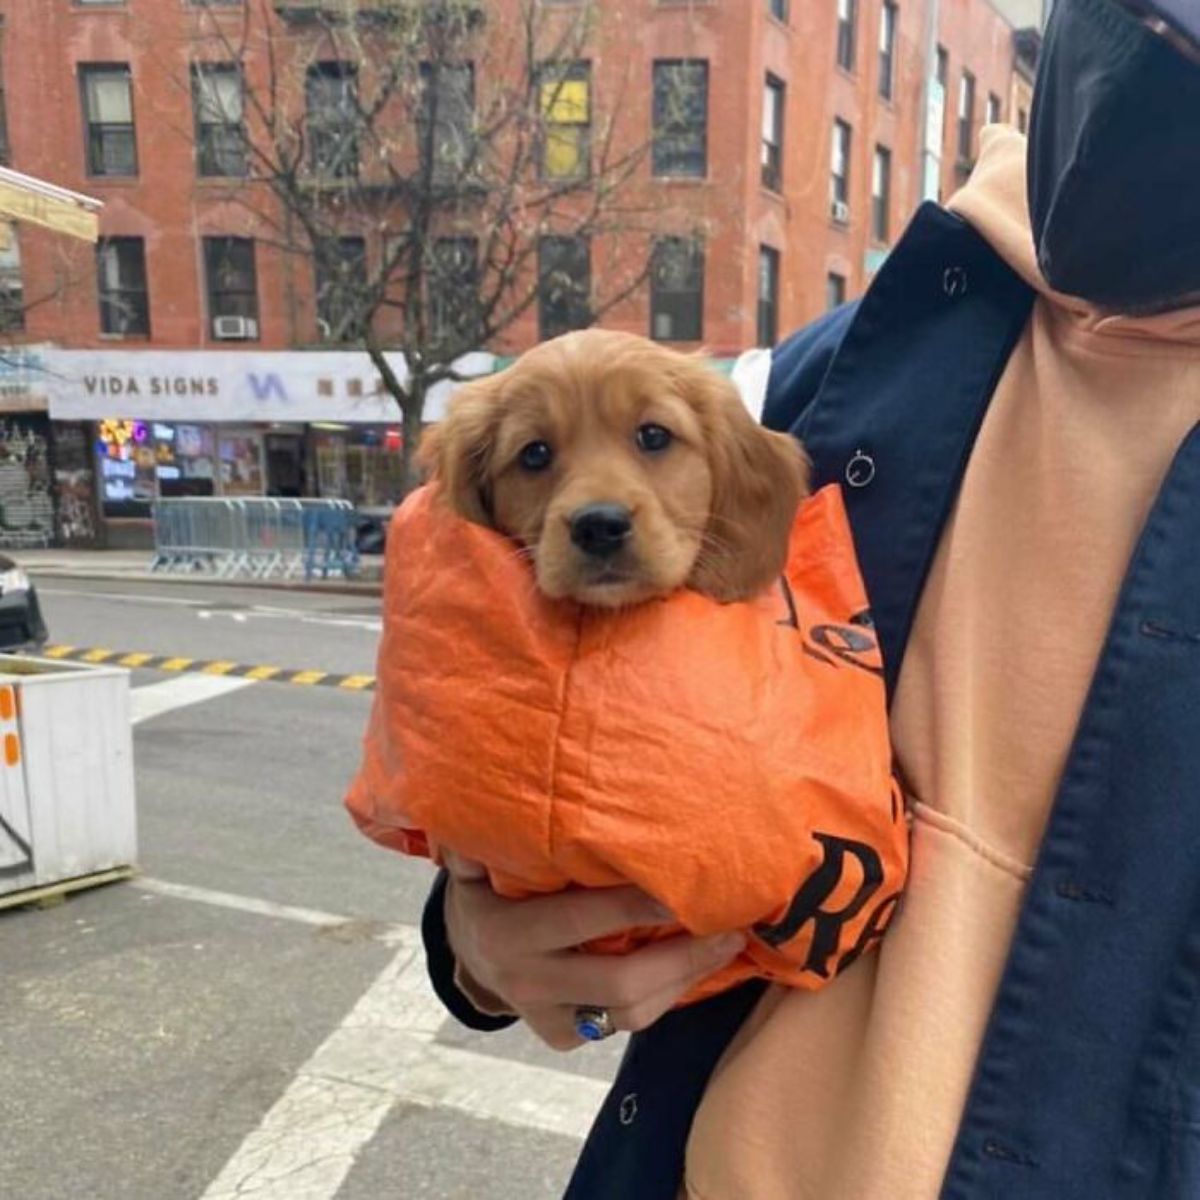 golden retriever puppy bundled up in an orange bag with its head sticking out being carried by someone wearing blue